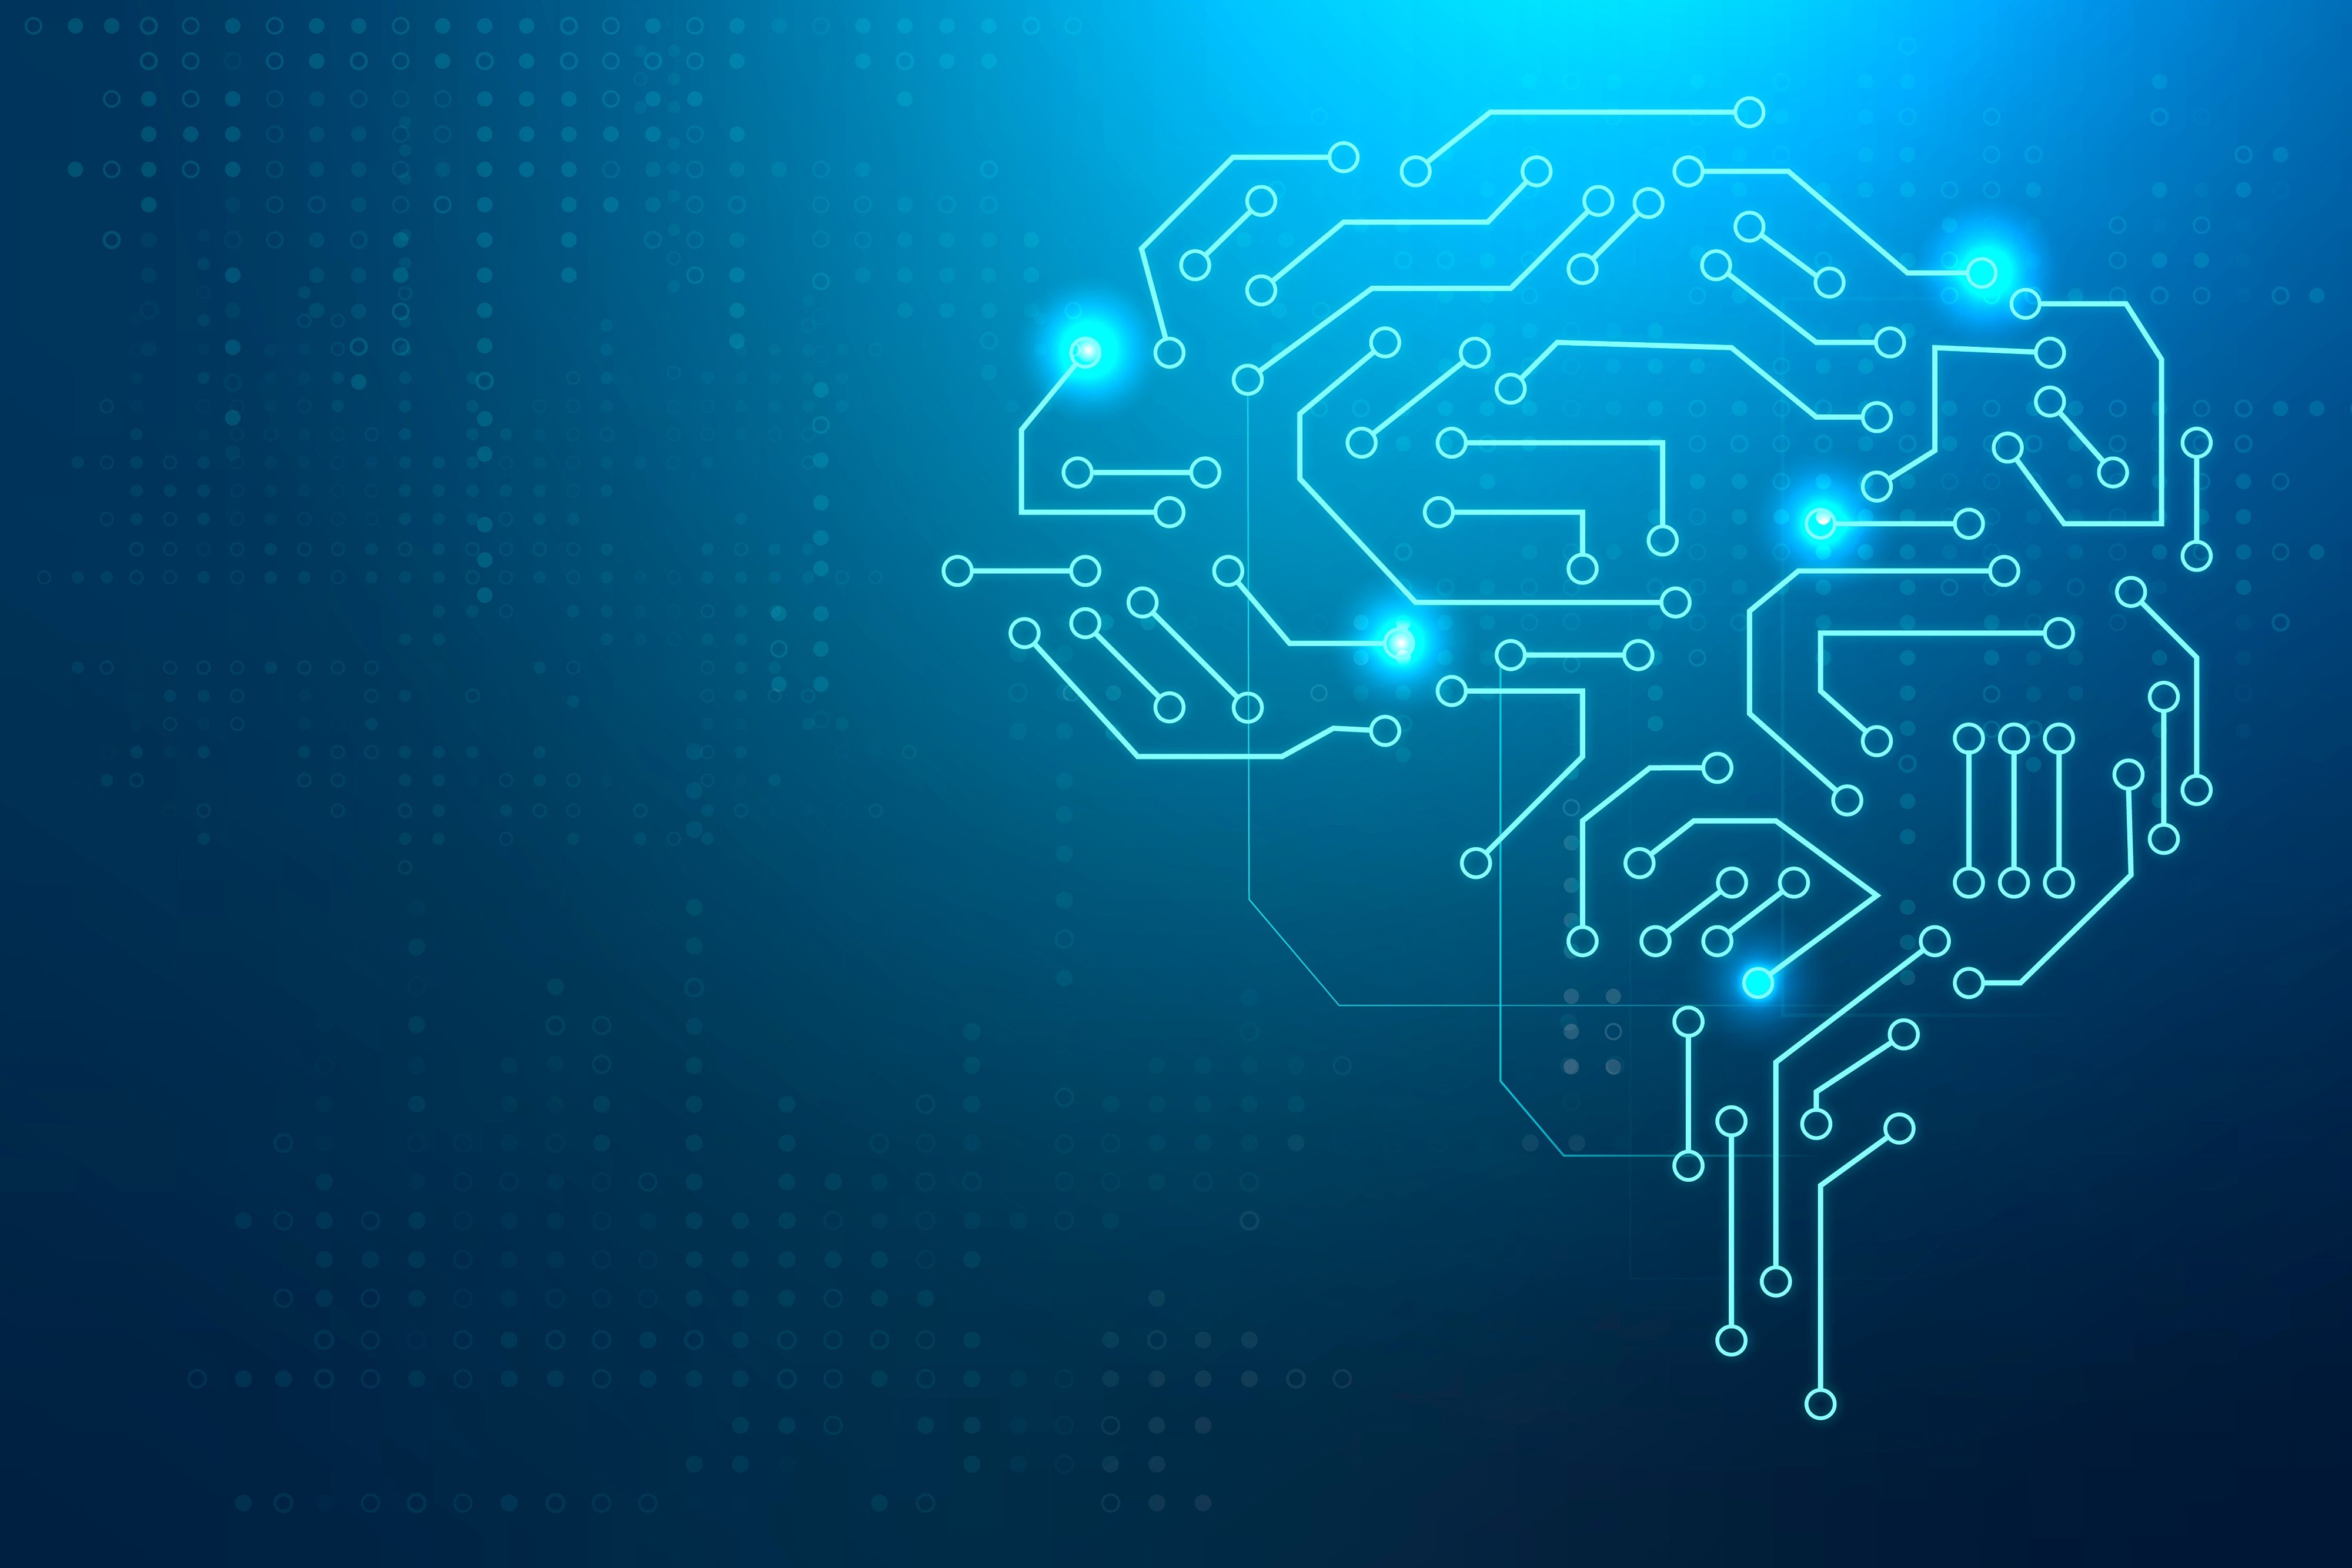 Digital illustration of a brain-shaped circuit network on a dark blue background, symbolizing the concept of artificial intelligence and machine learning, with glowing connection points representing neural activity or data processing.